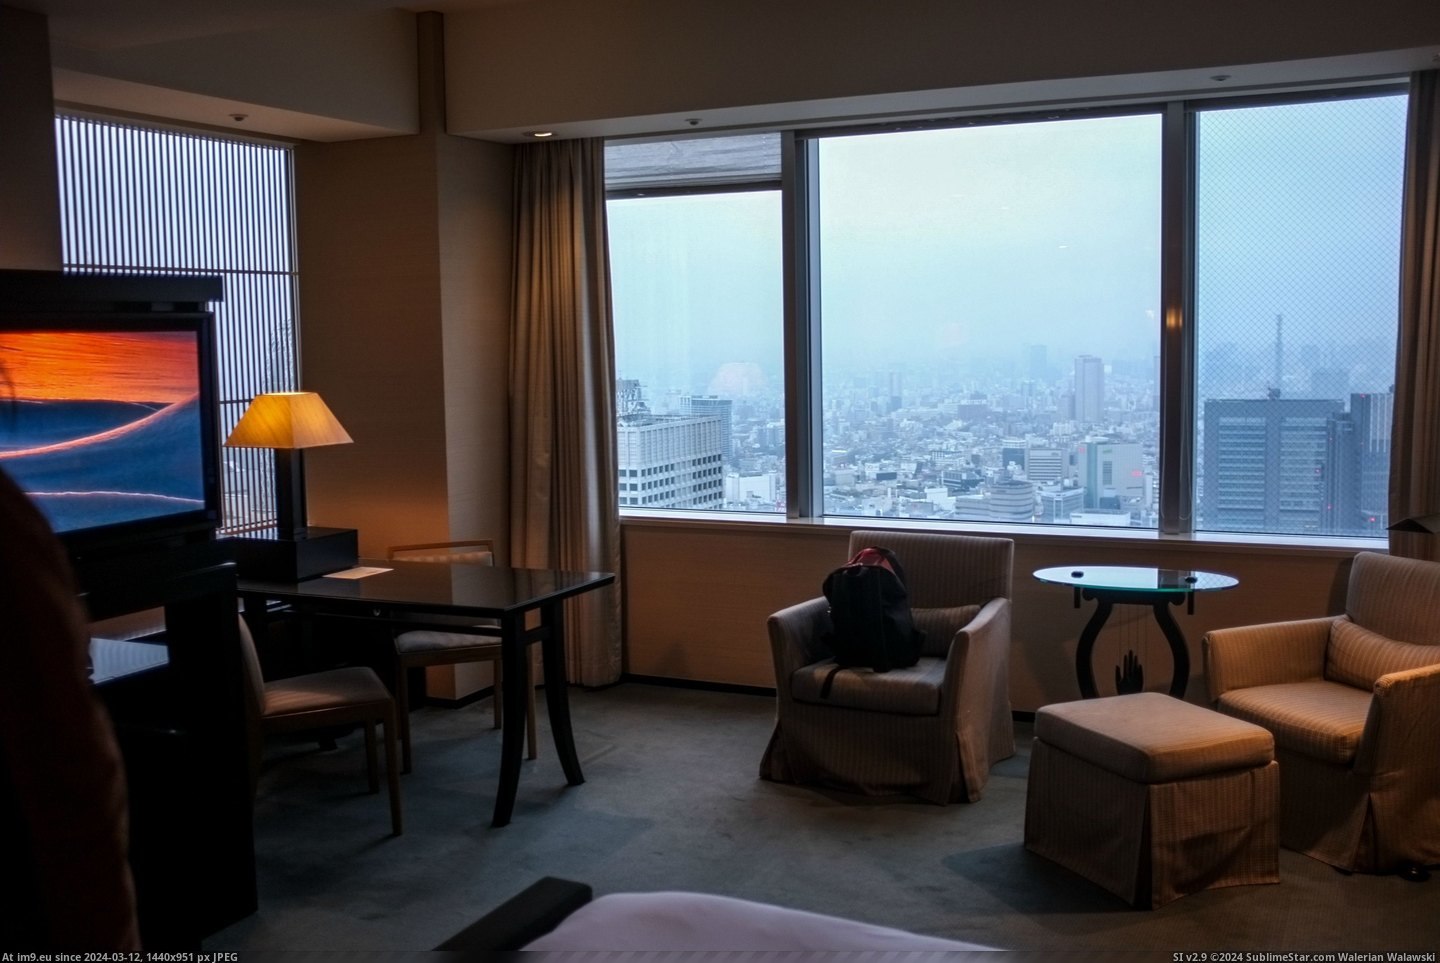 #Park #Film #Room #Hotel #Lost #Request #Stay #Asked [Pics] I asked to stay in Bill Murray's hotel room from the film Lost In Translation [Tokyo, Park Hyatt] My request was granted. Pic. (Image of album My r/PICS favs))